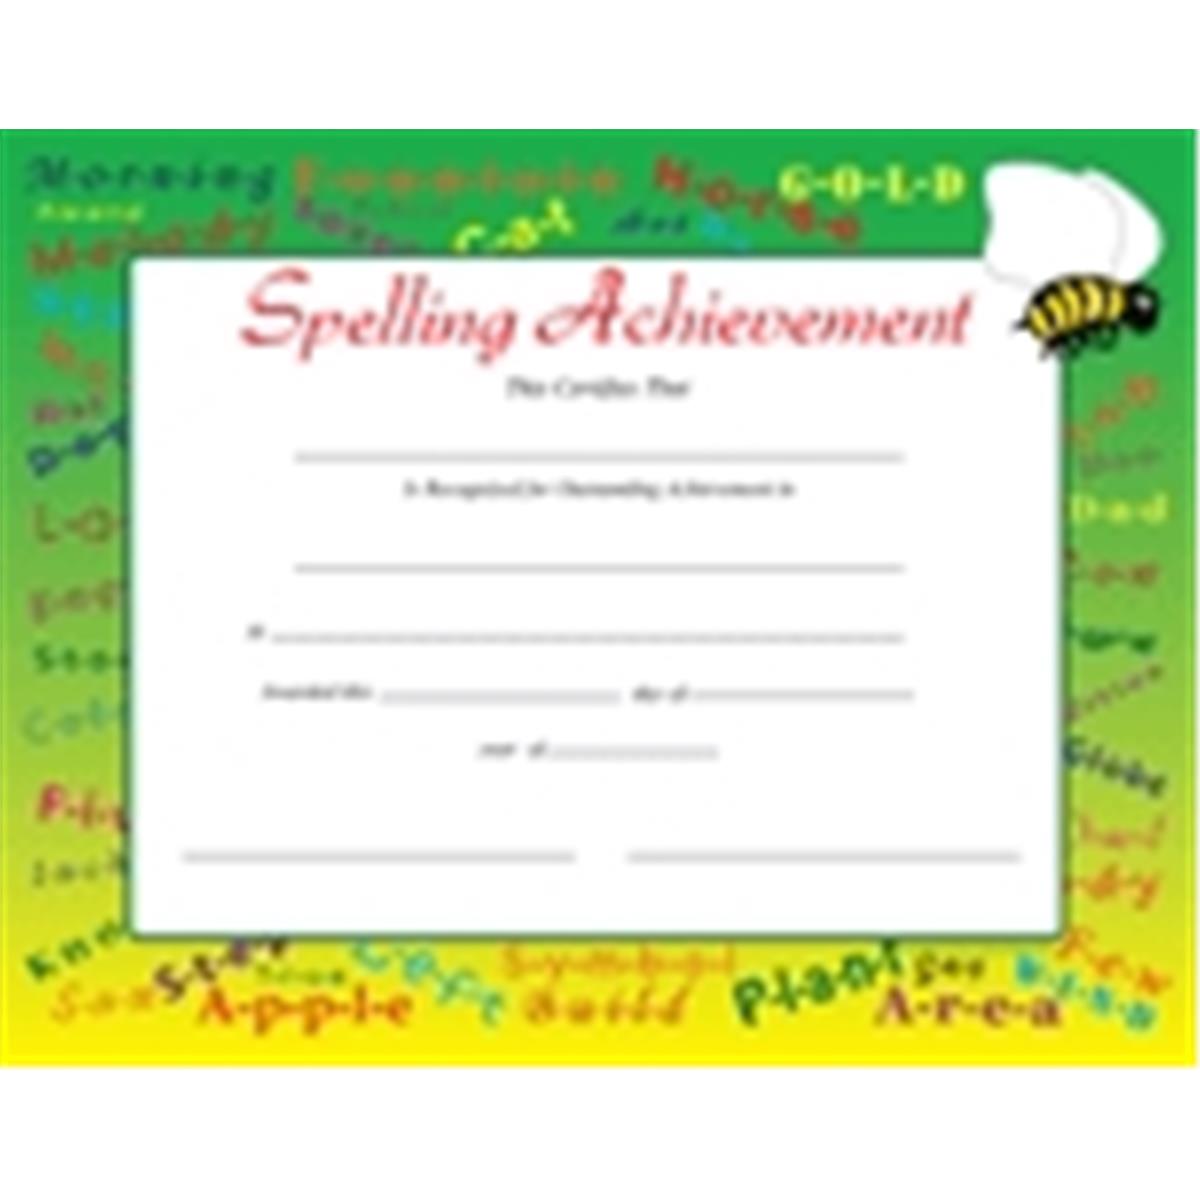 Picture of Creative Shapes Etc SE-3202 8.5 x 11 in. Spelling Achievement Certificate - 30 Sheets per Pack